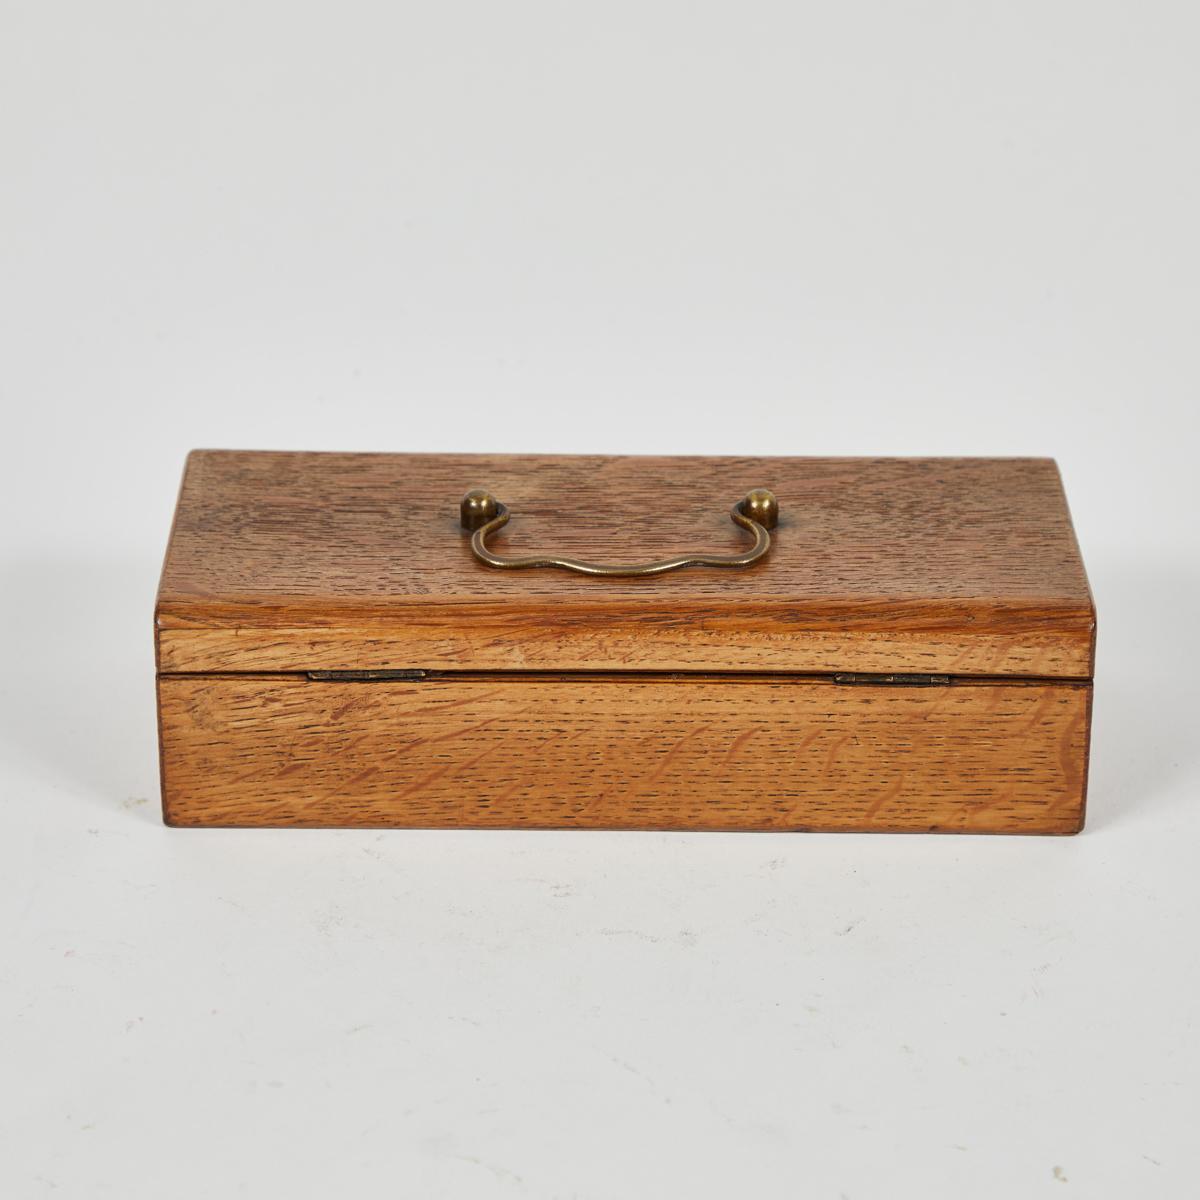 Wood Small Storage Box for Glasses from Late 19th Century England